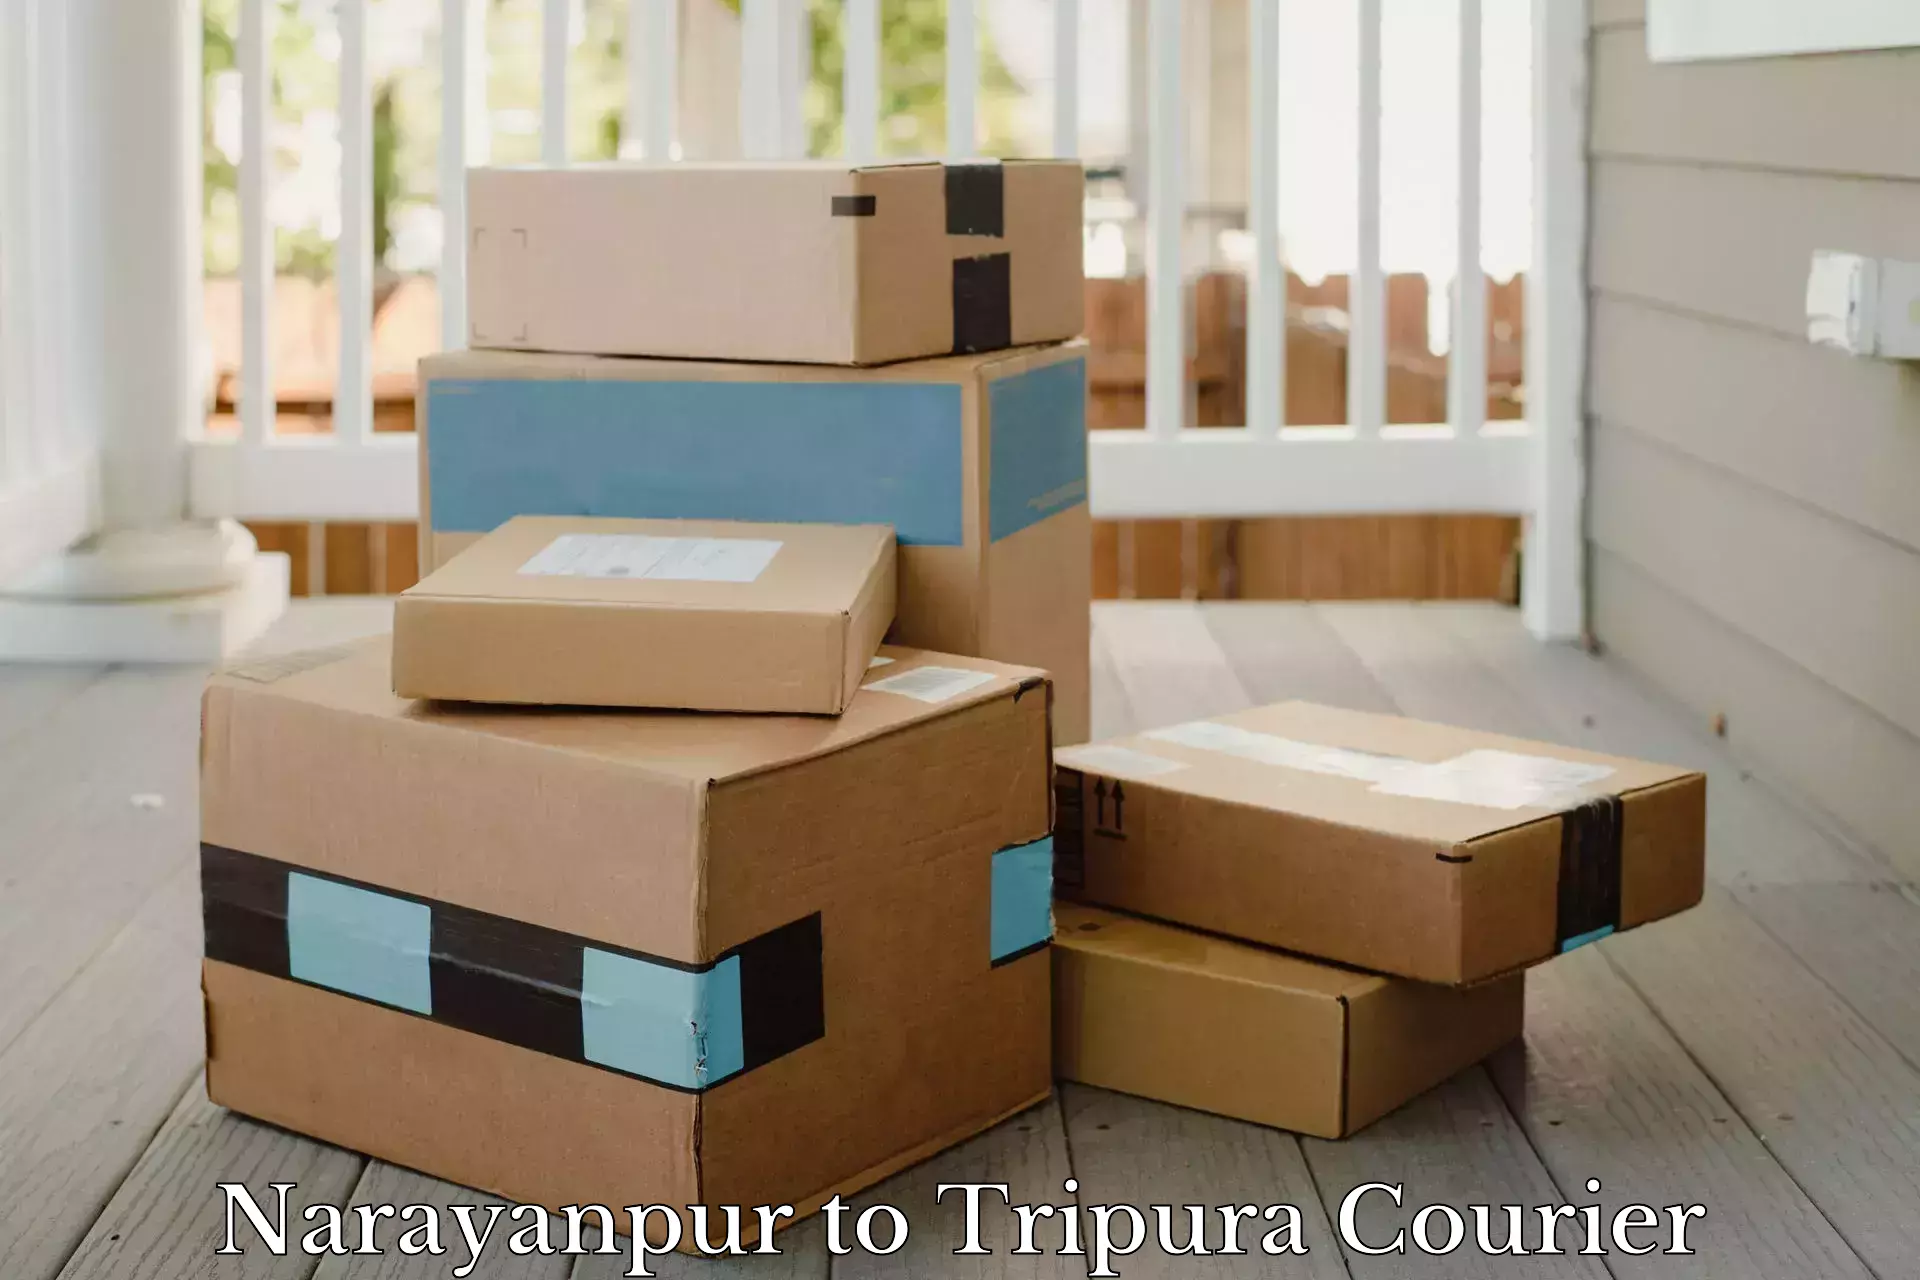 Courier service comparison Narayanpur to Aambasa